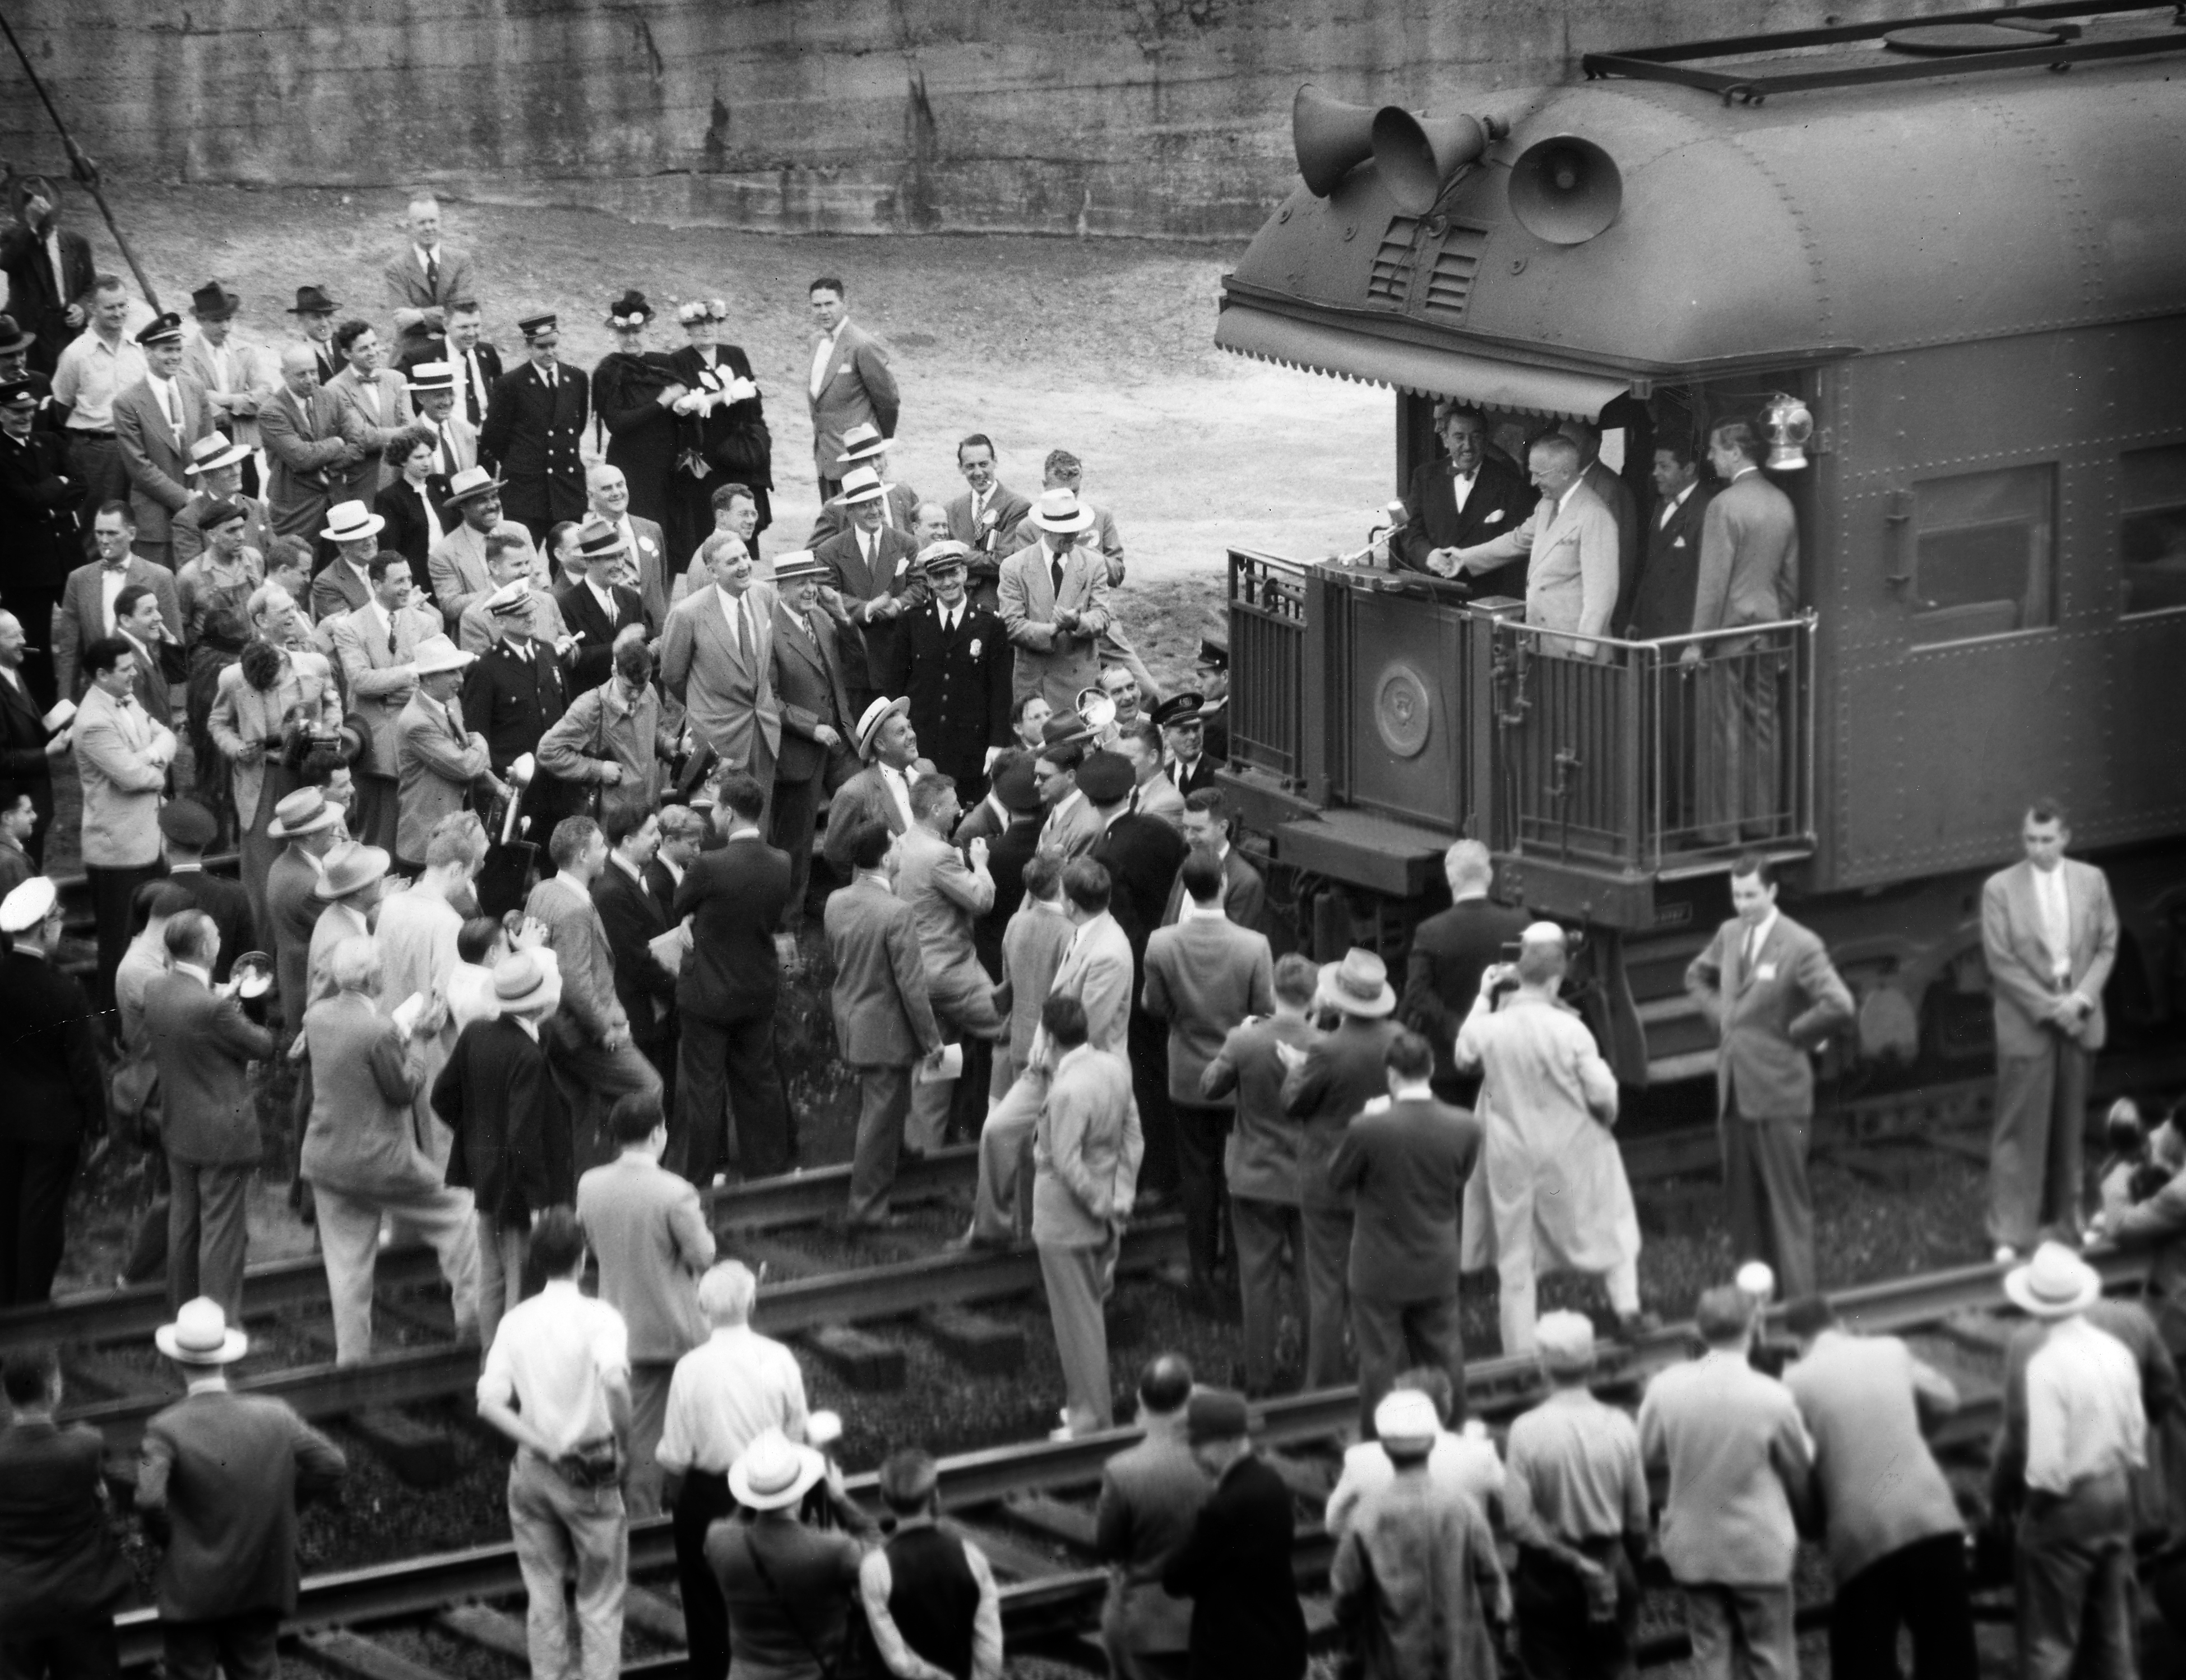 Harry S Truman addressing the crowd at a train stop in Baltimore in June of 1948. (Robert F. Kniesche/Baltimore Sun) ORG XMIT: BAL1009010730120673